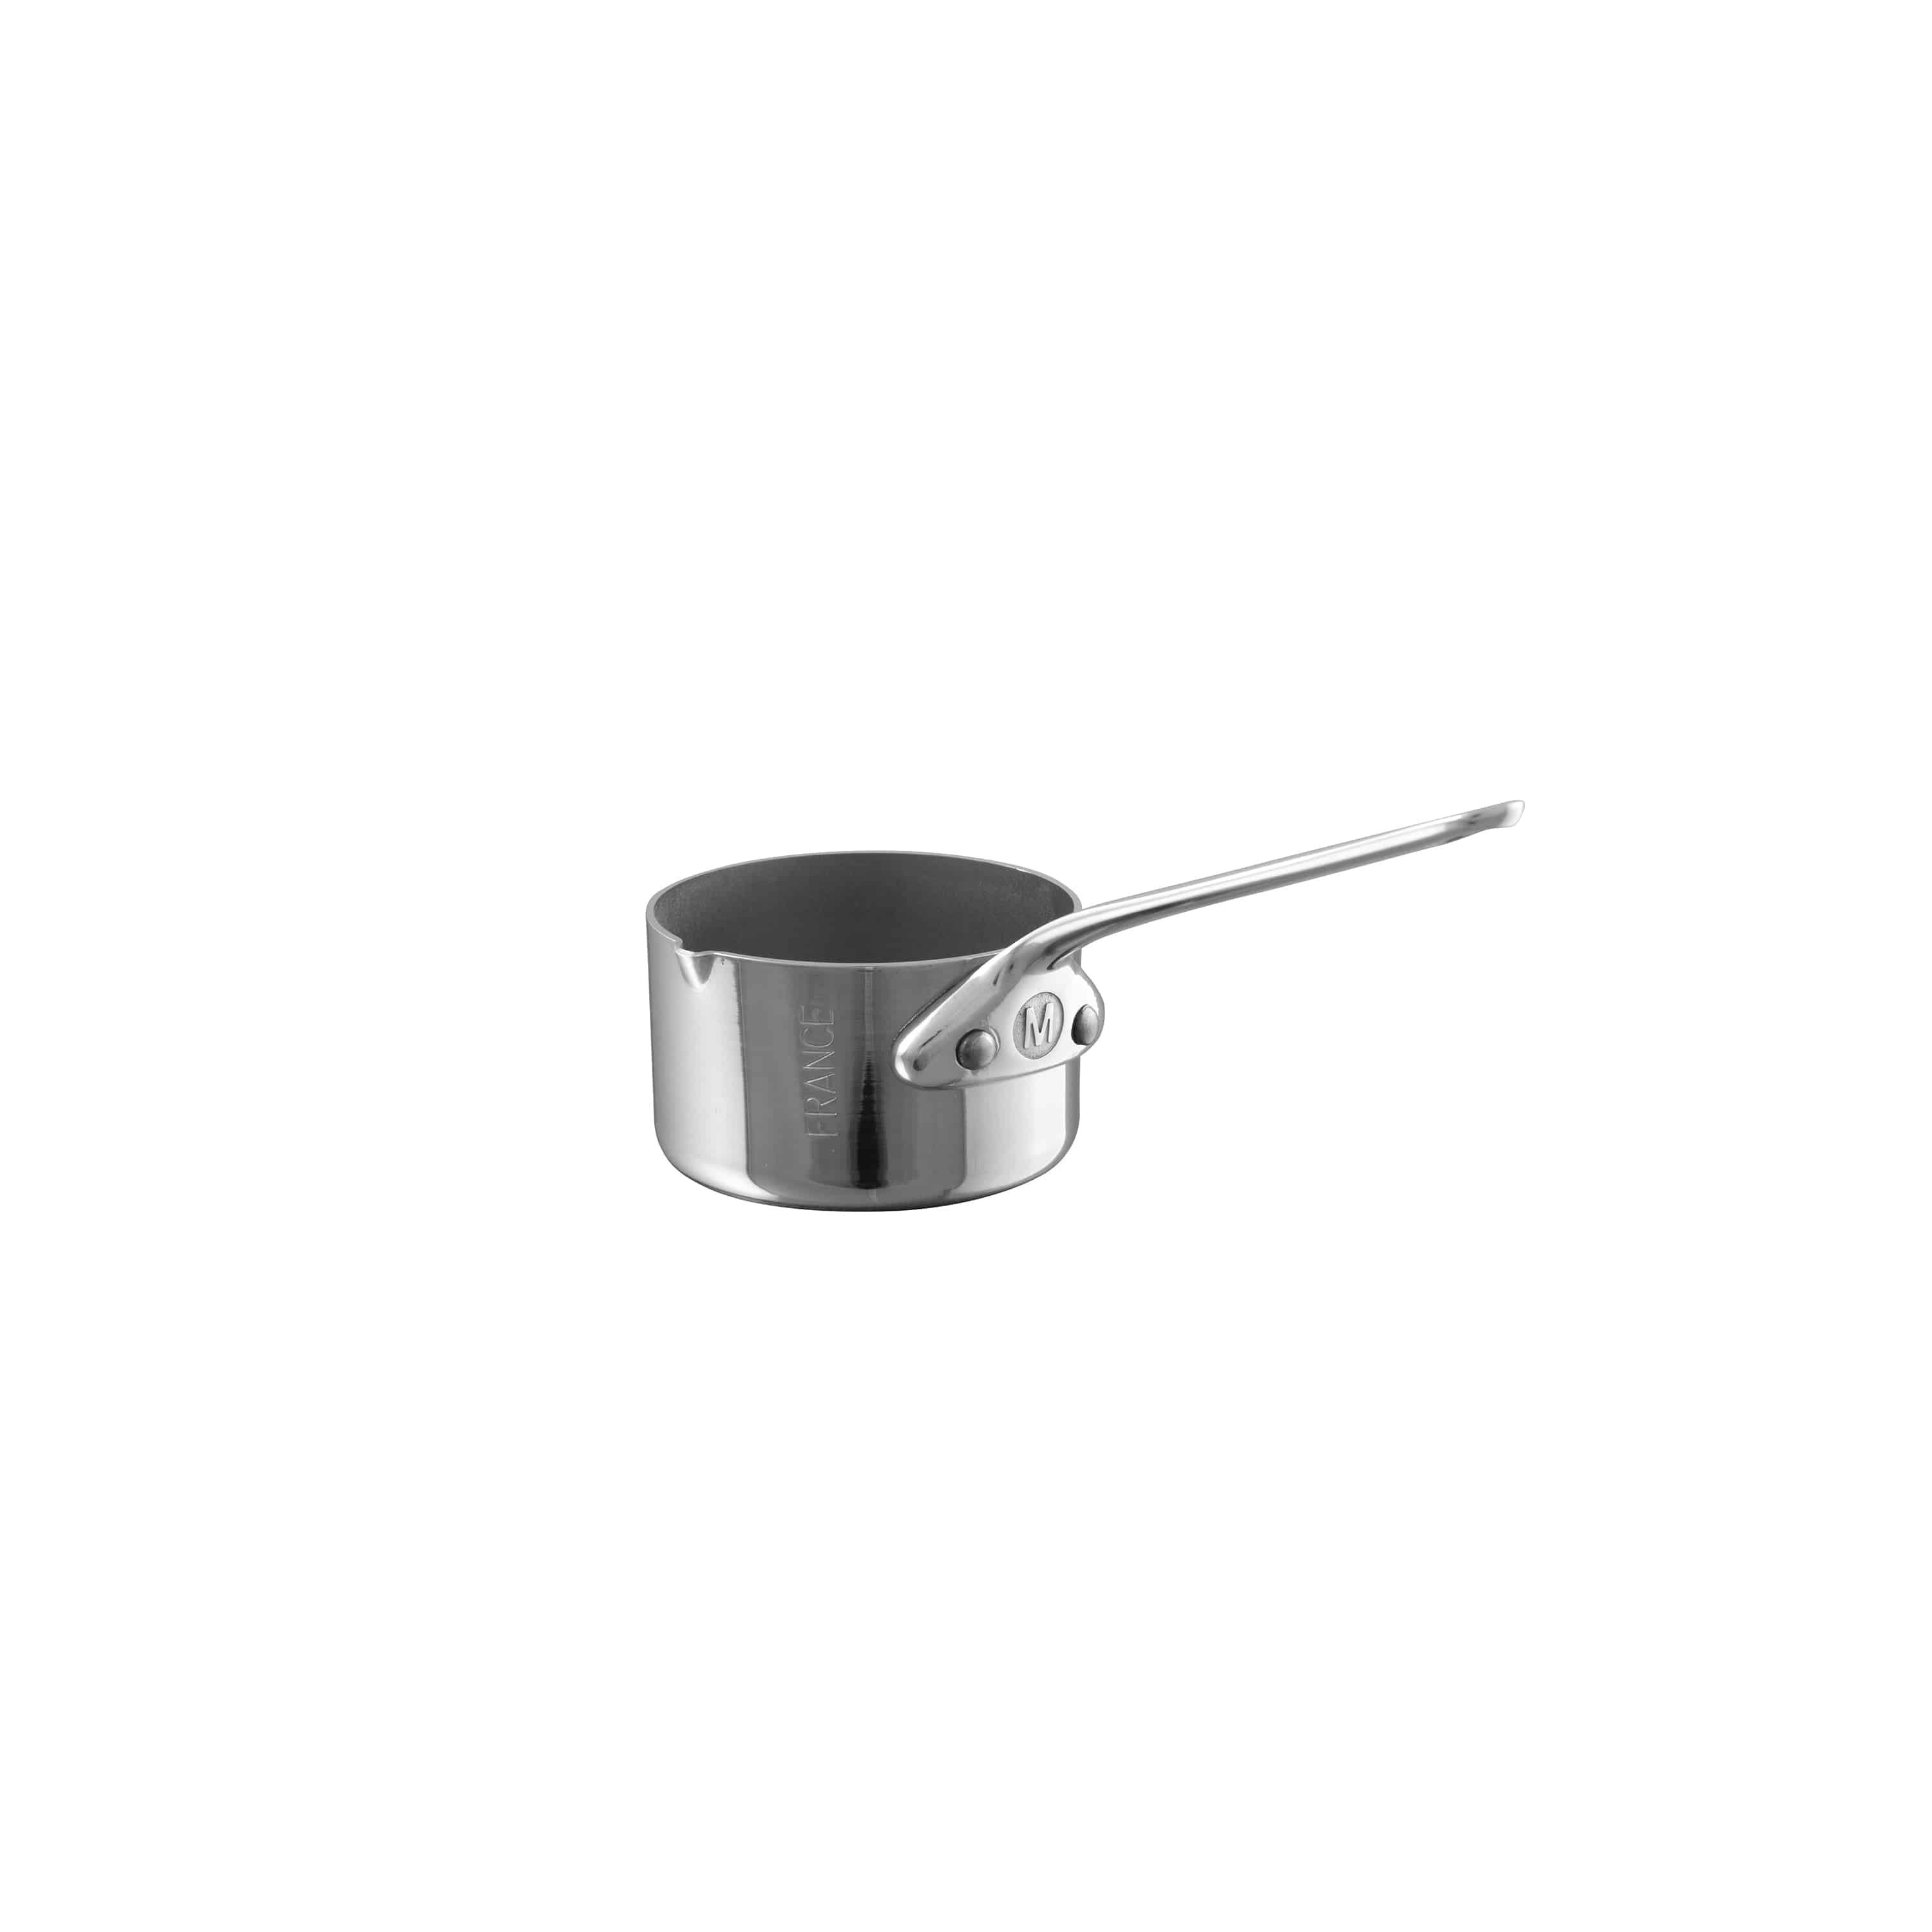 Mauviel M'Mini Stainless Steel Sauce Pan with Pouring Spout, 0.21-qt